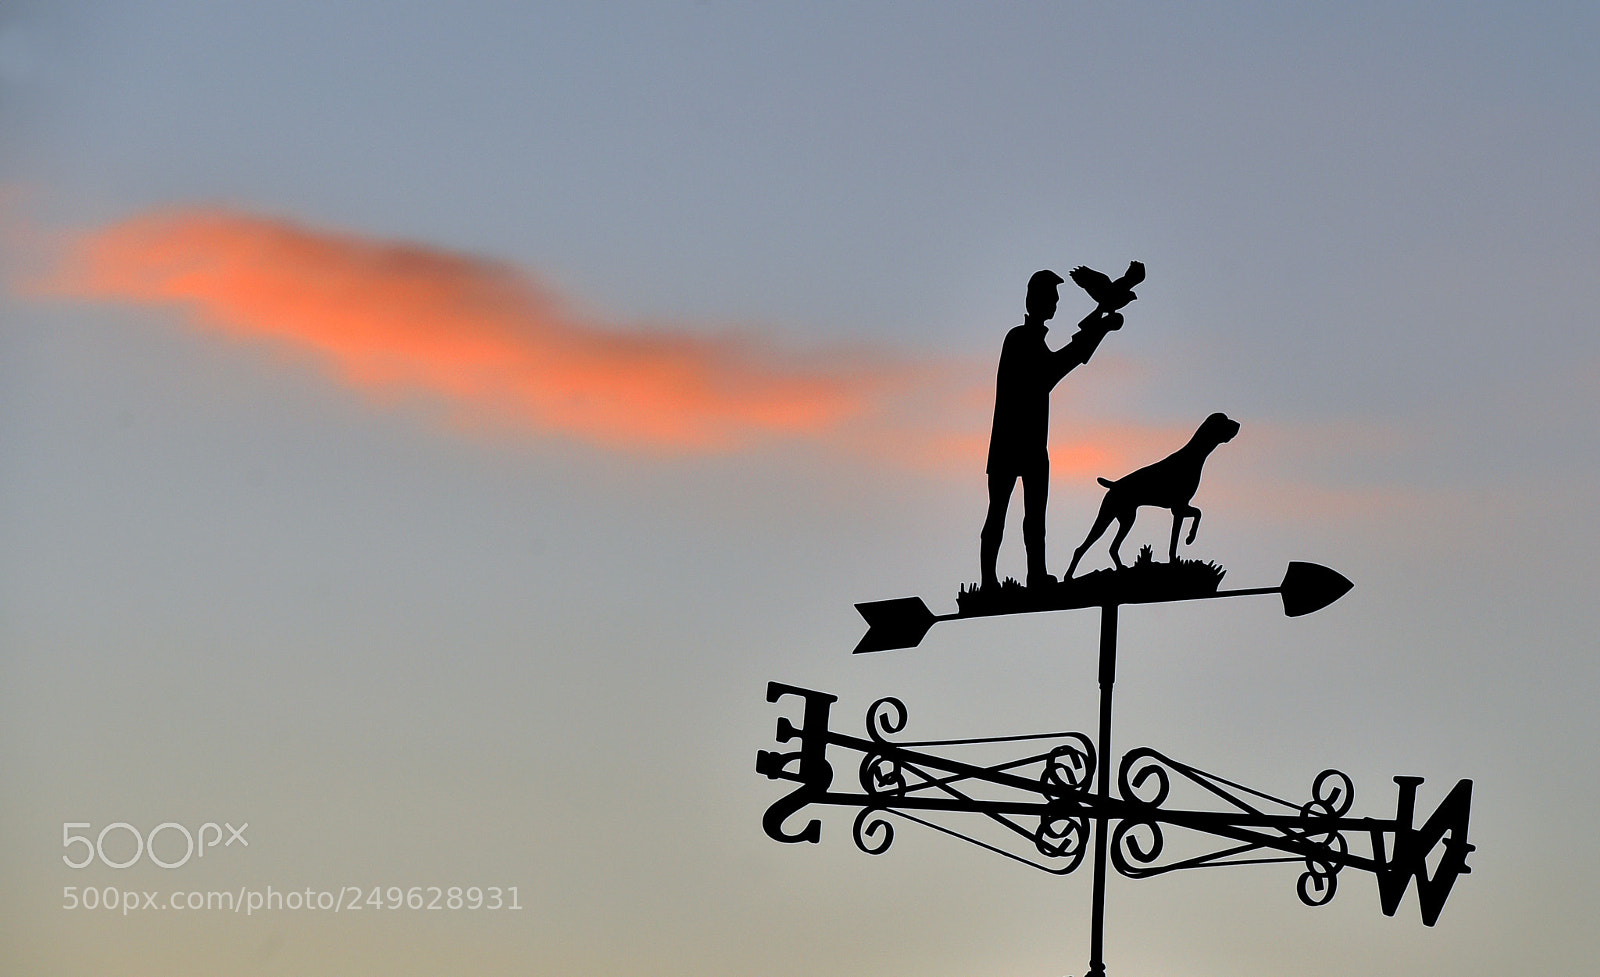 Nikon D4S sample photo. Rural weather vane in photography